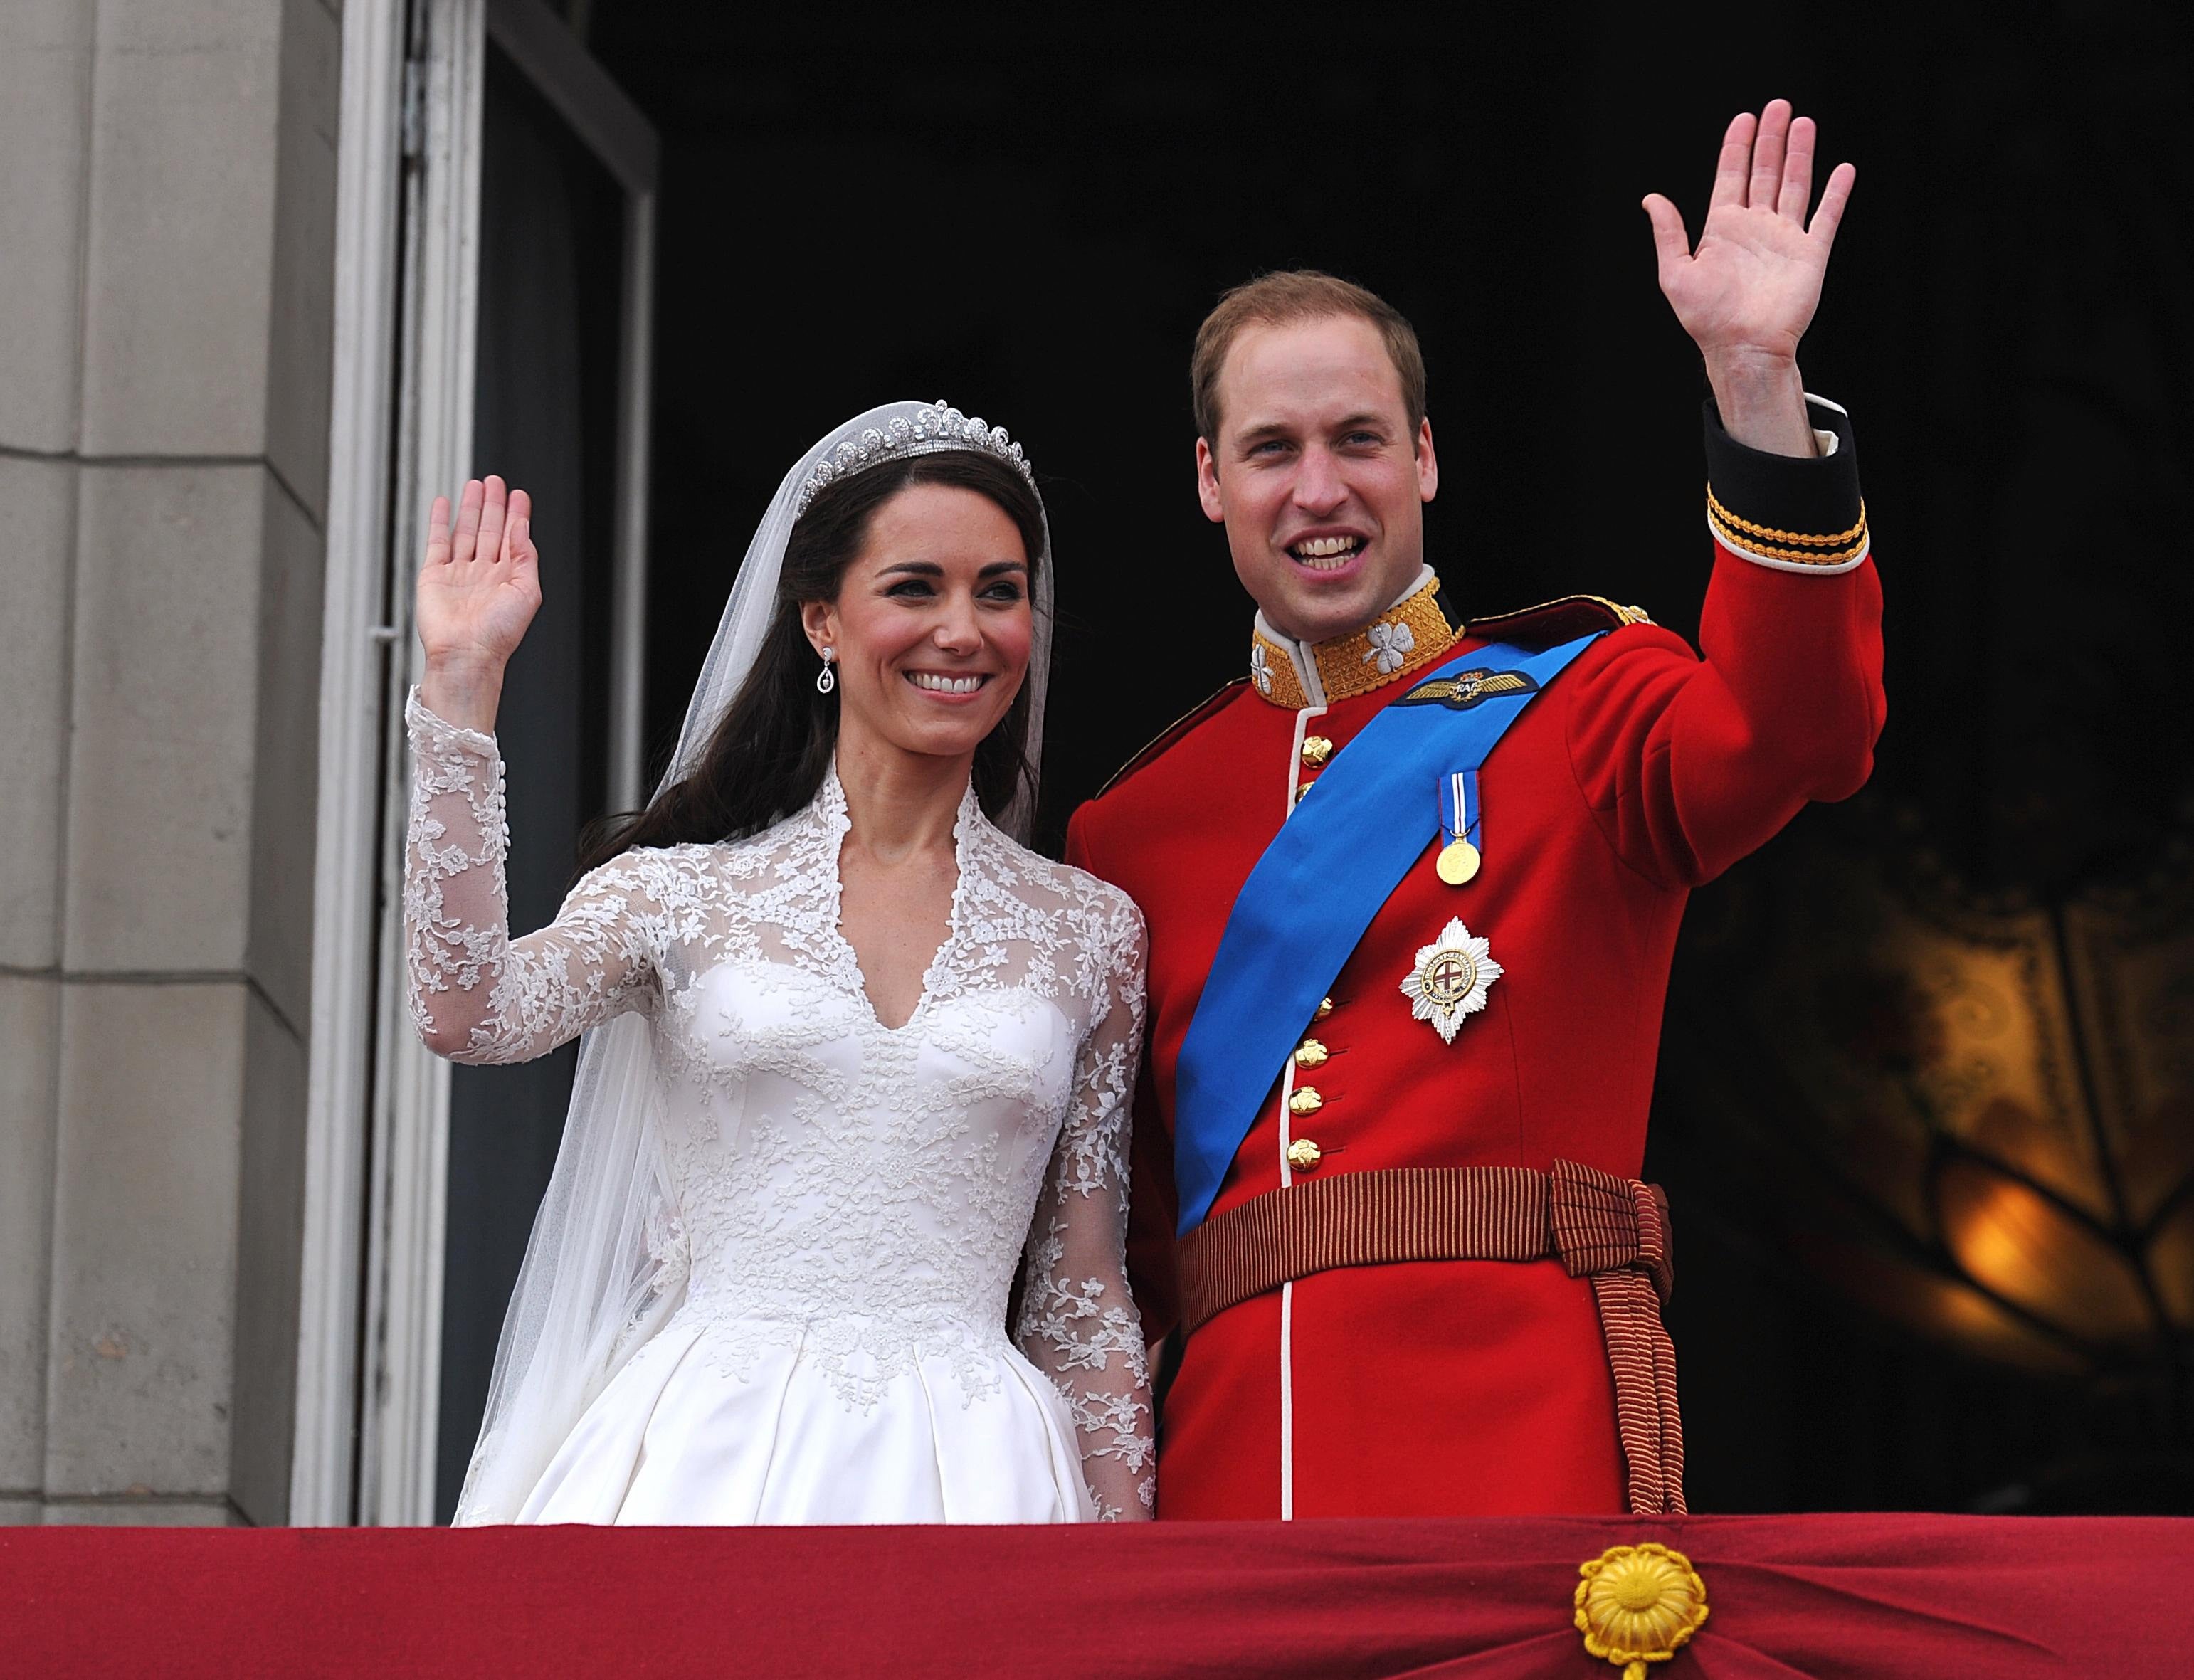 William and Kate wed at Westminster Abbey on 29 April 2011